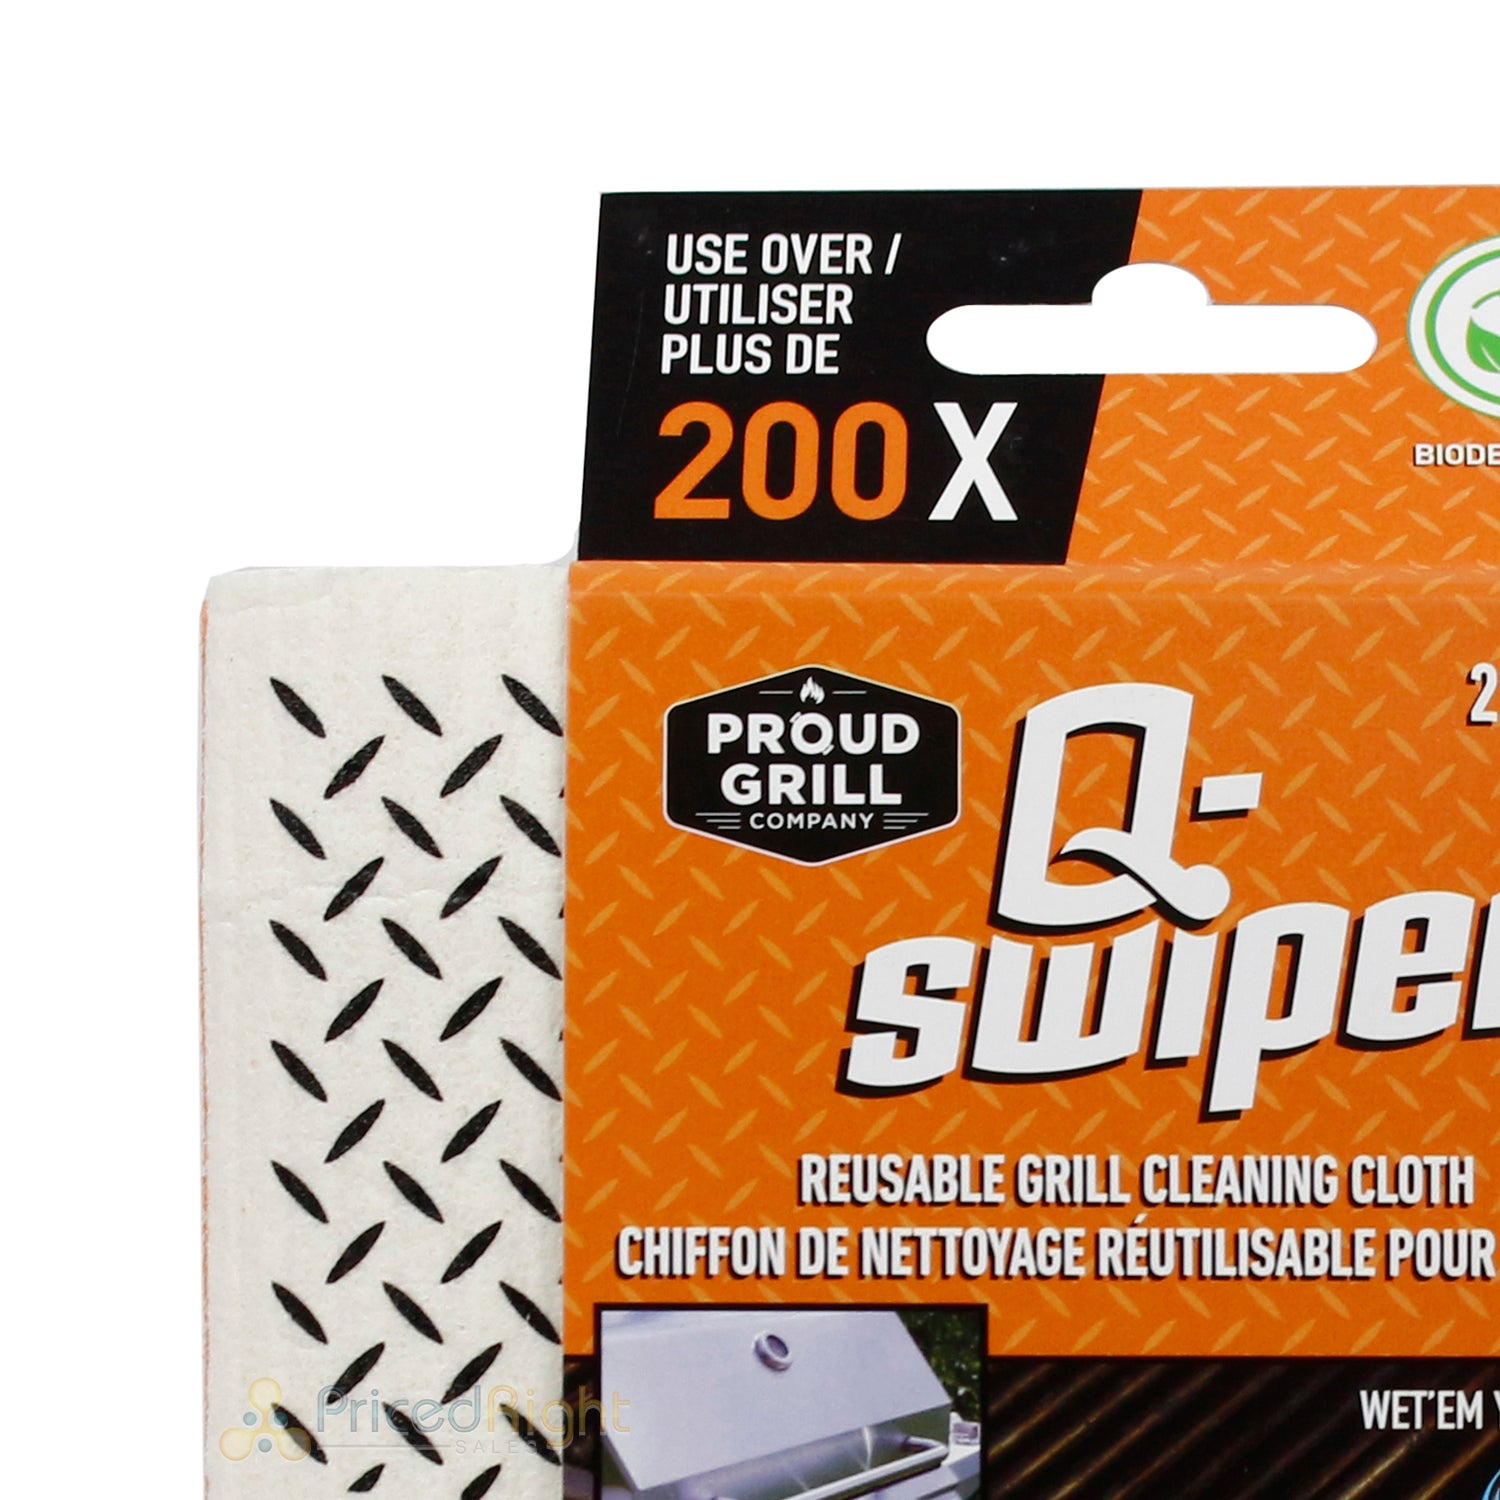 Q-Swiper Reusable Biodegradable Grill Cleaning Cloths Cellulose/Cotton 2 Pack